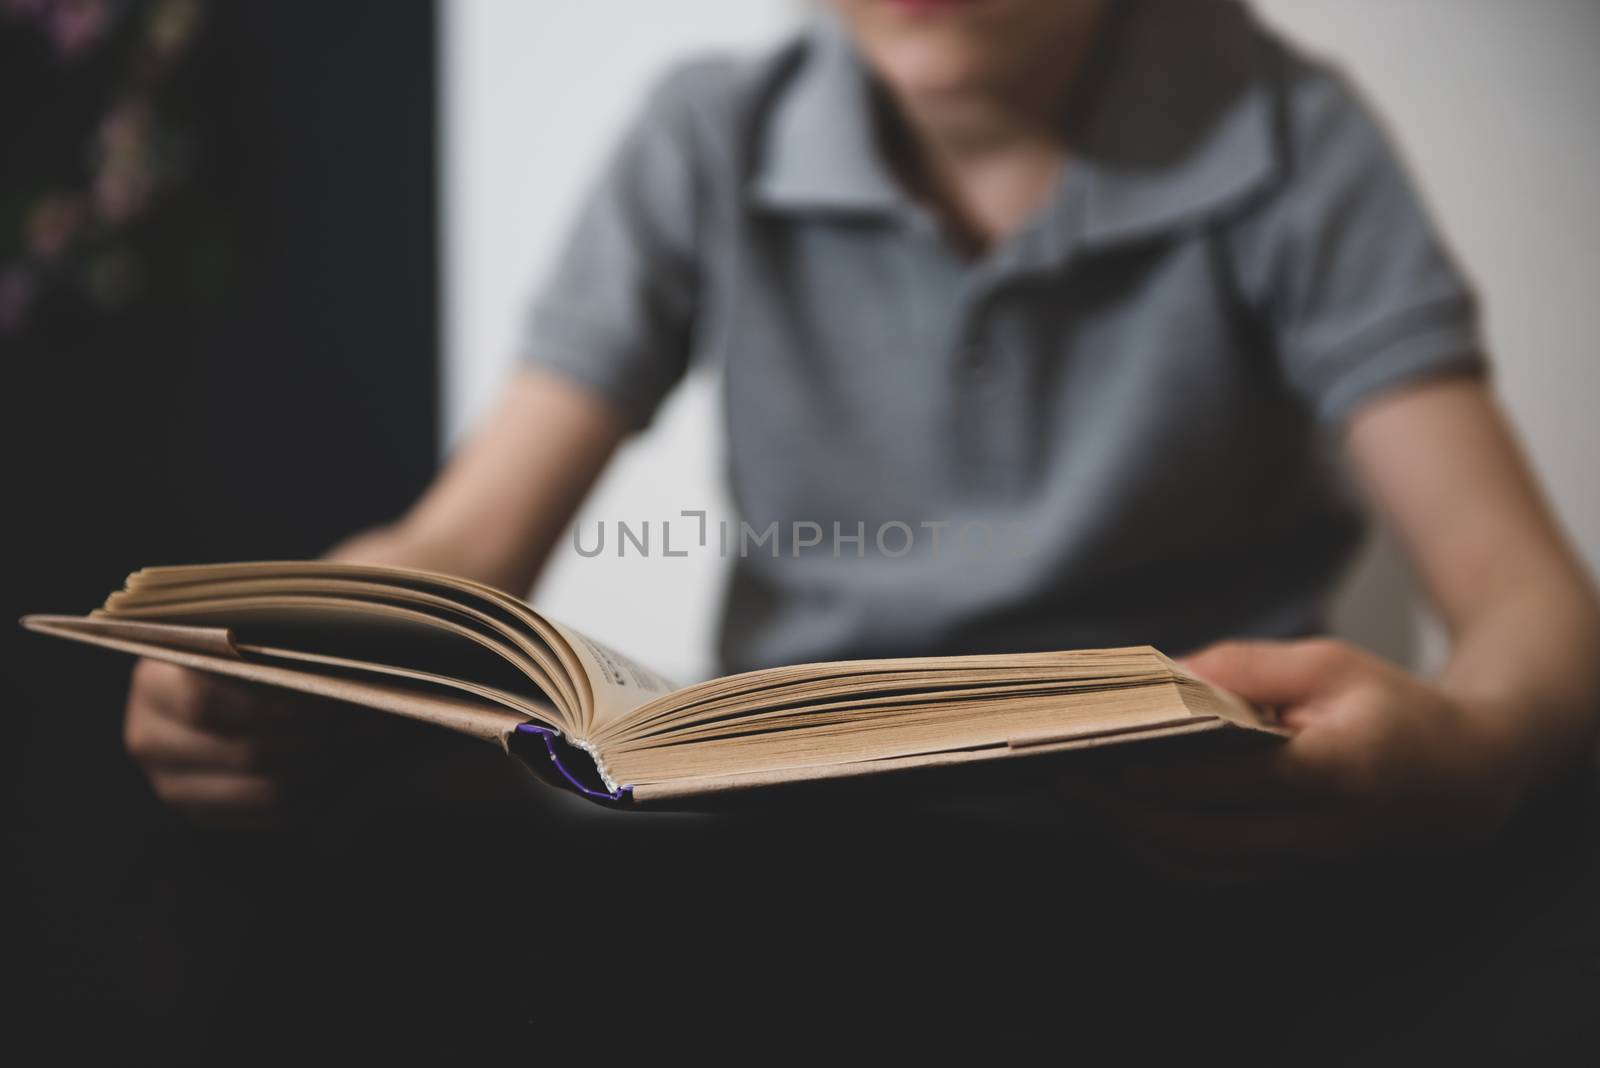 vague image of a boy reading a book by marynkin